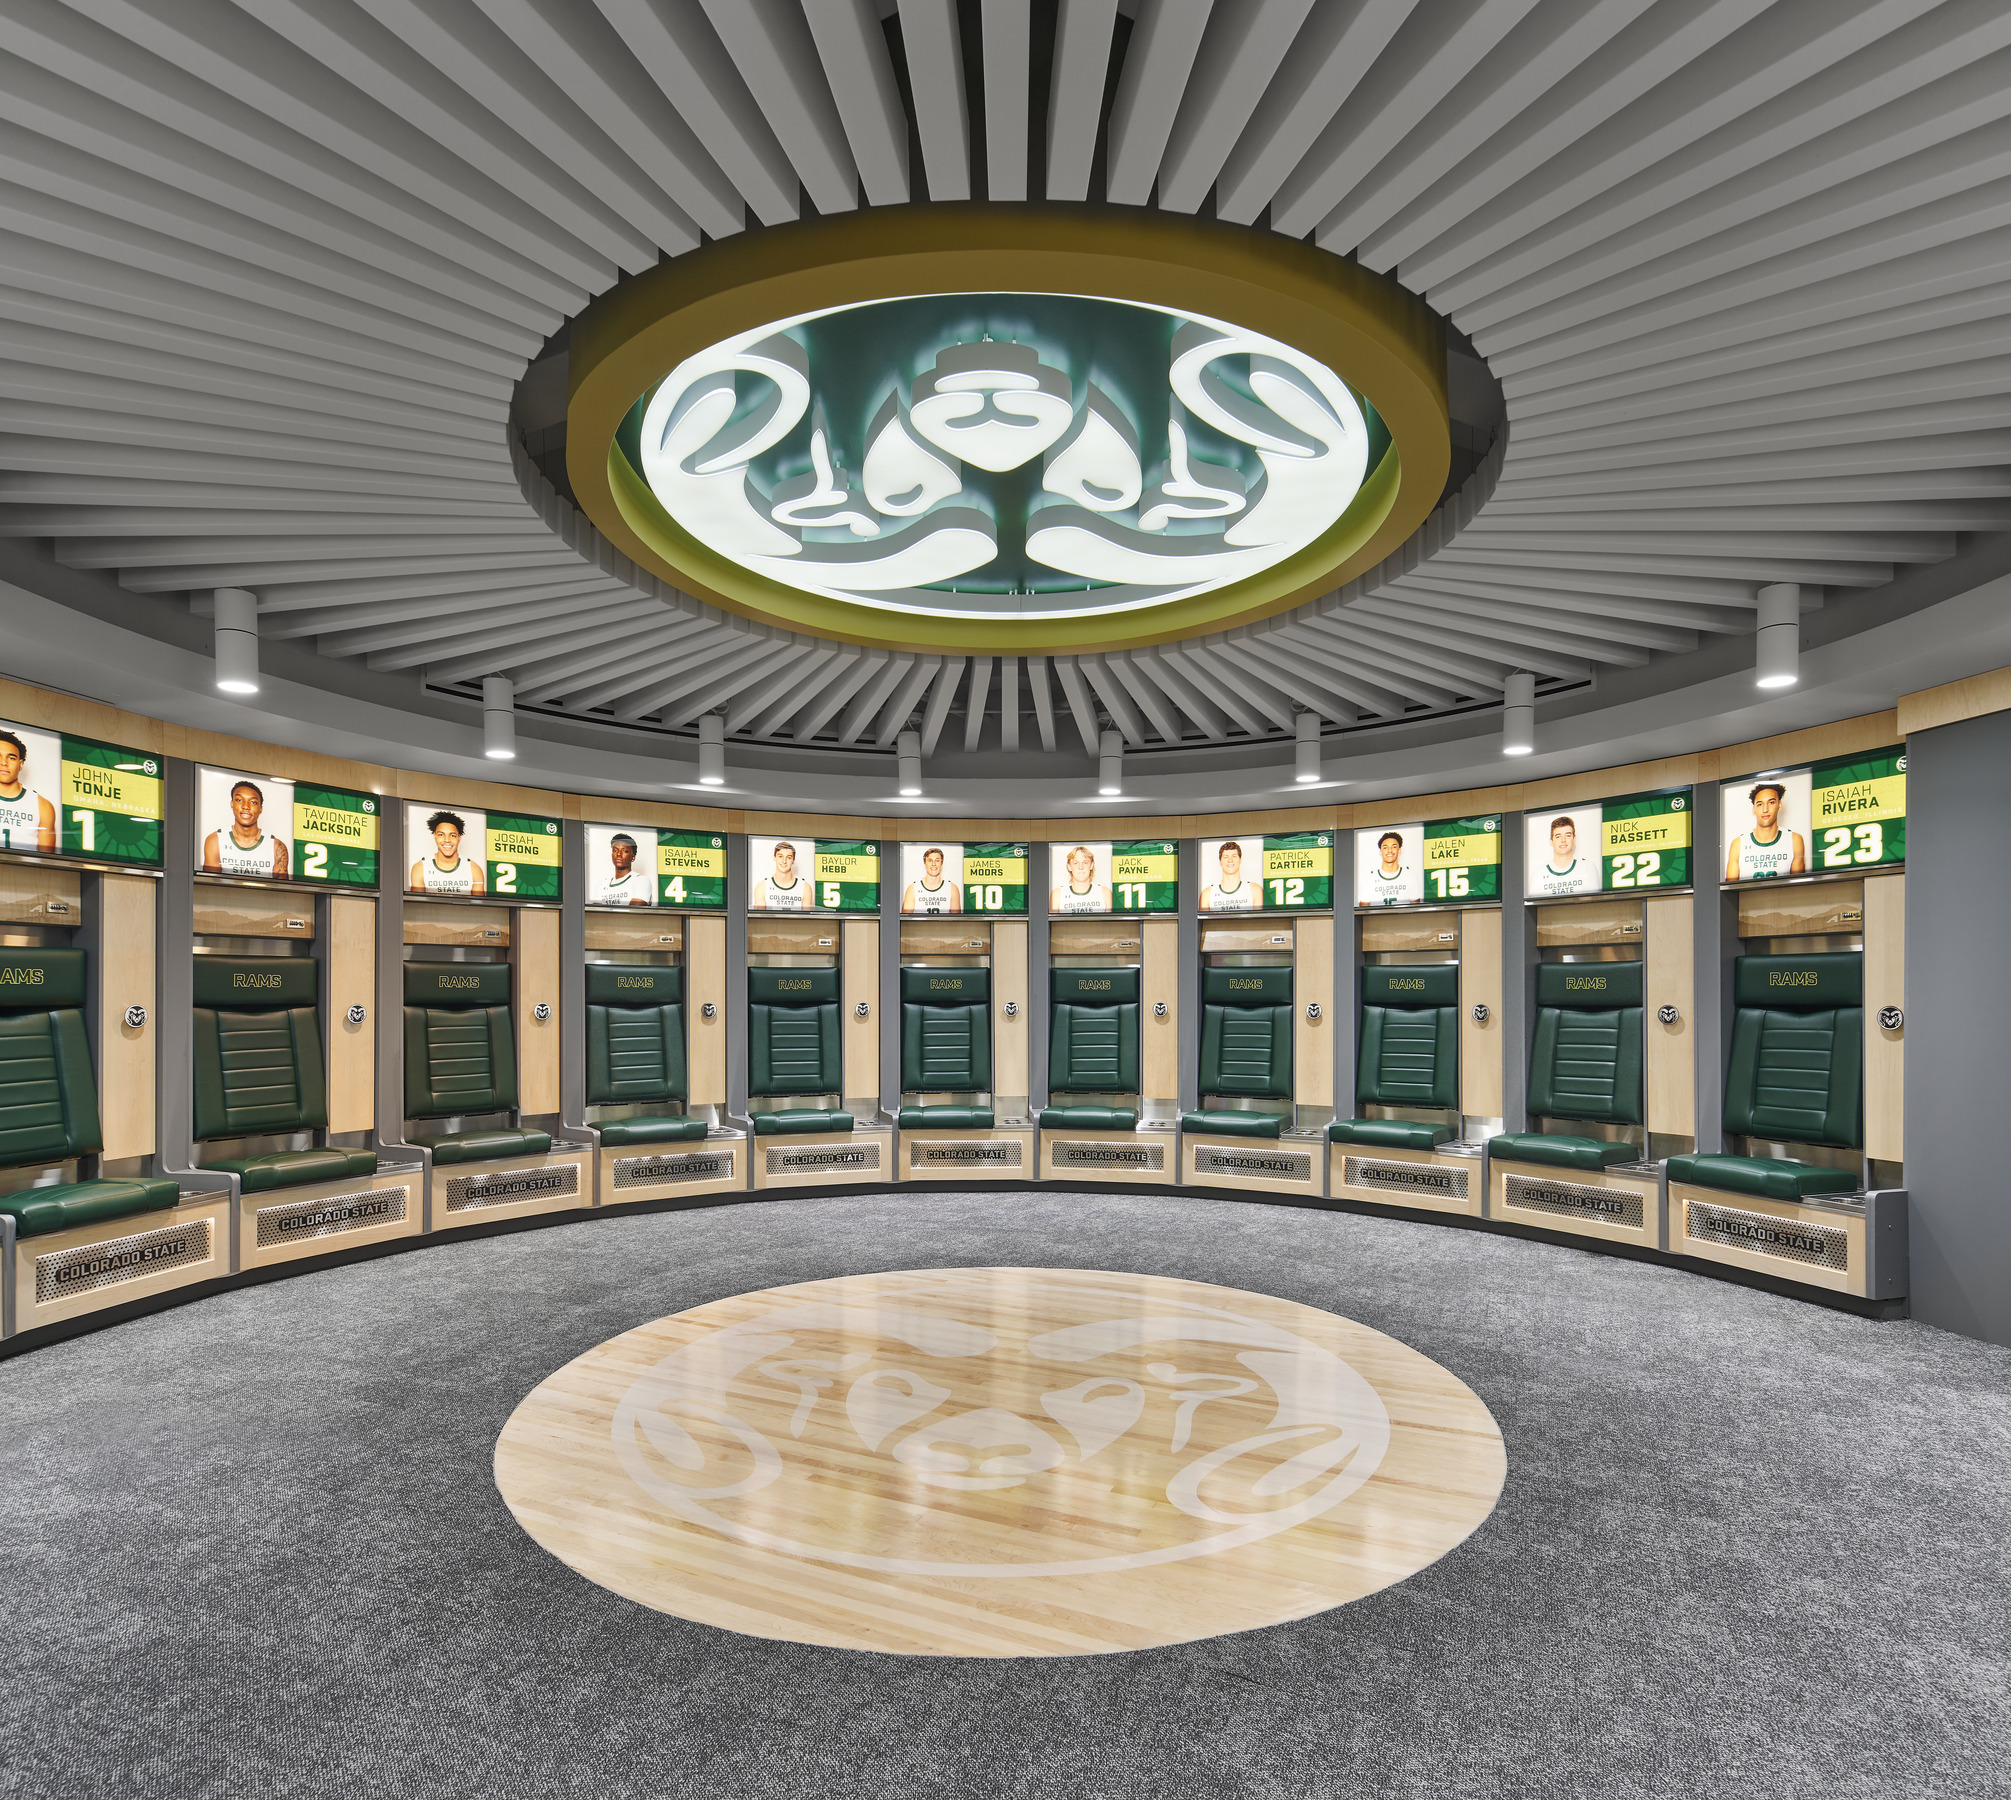 team branding, large Rams logo emblem adorns the ceiling, personalized lockers for the athletes with illuminated photo, name, and jersey number of each athlete's locker with private seating